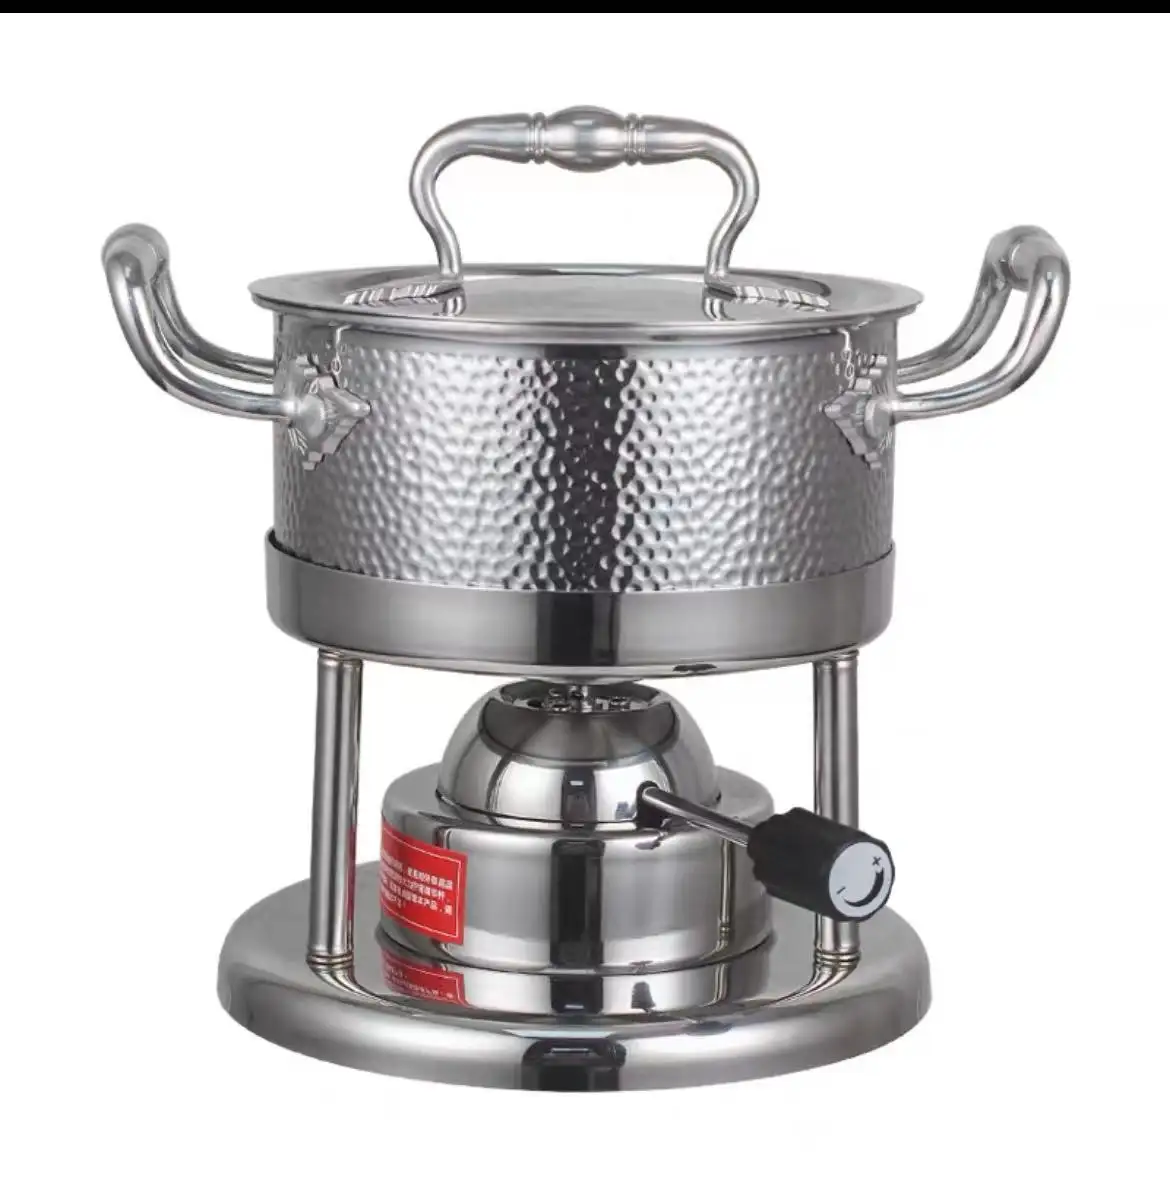 Triply wall chafing dish with Clad Hammered soup pot hotpot with vegetable-shaped